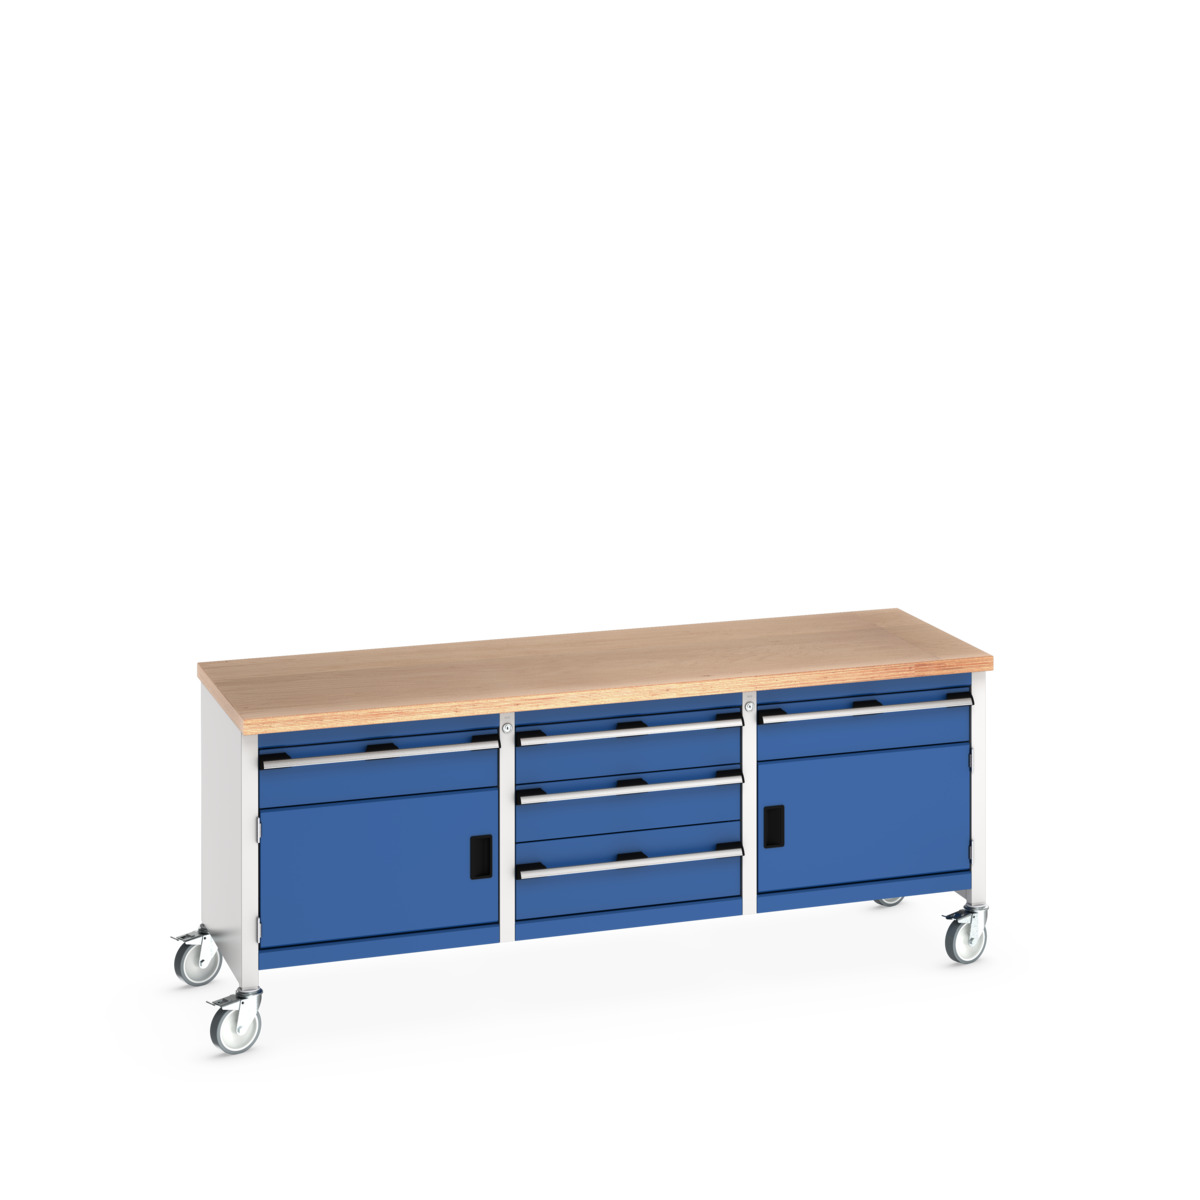 41002133.11V - cubio mobile storage bench (mpx)